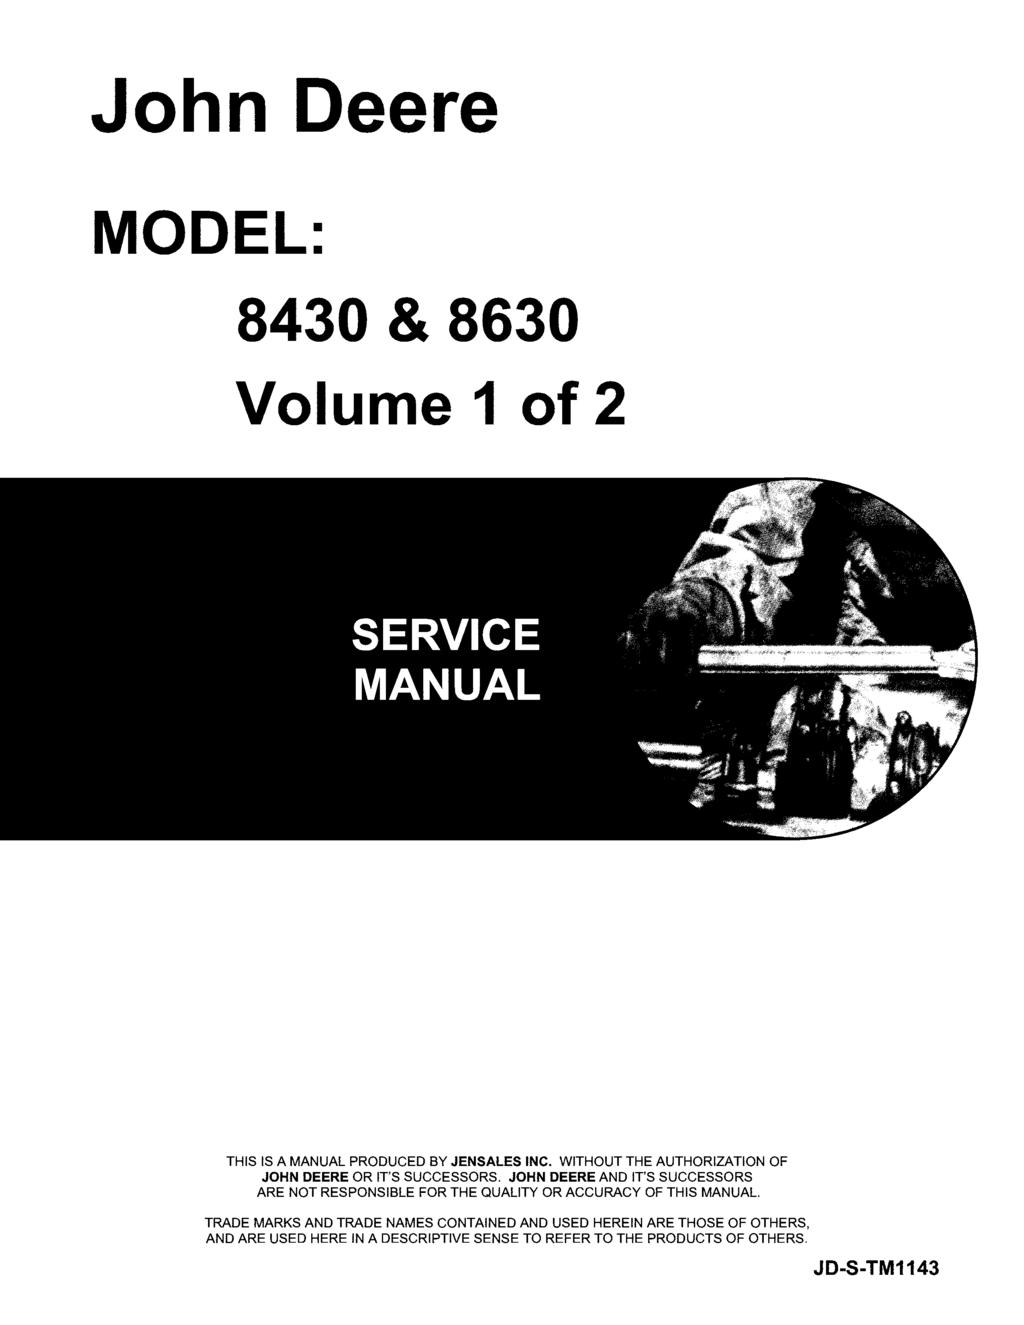 John Deere MODEL: 8430 & 8630 Volume 1 of 2 THIS IS A MANUAL PRODUCED BY JENSALES INC. WITHOUT THE AUTHORIZATION OF JOHN DEERE OR IT'S SUCCESSORS.